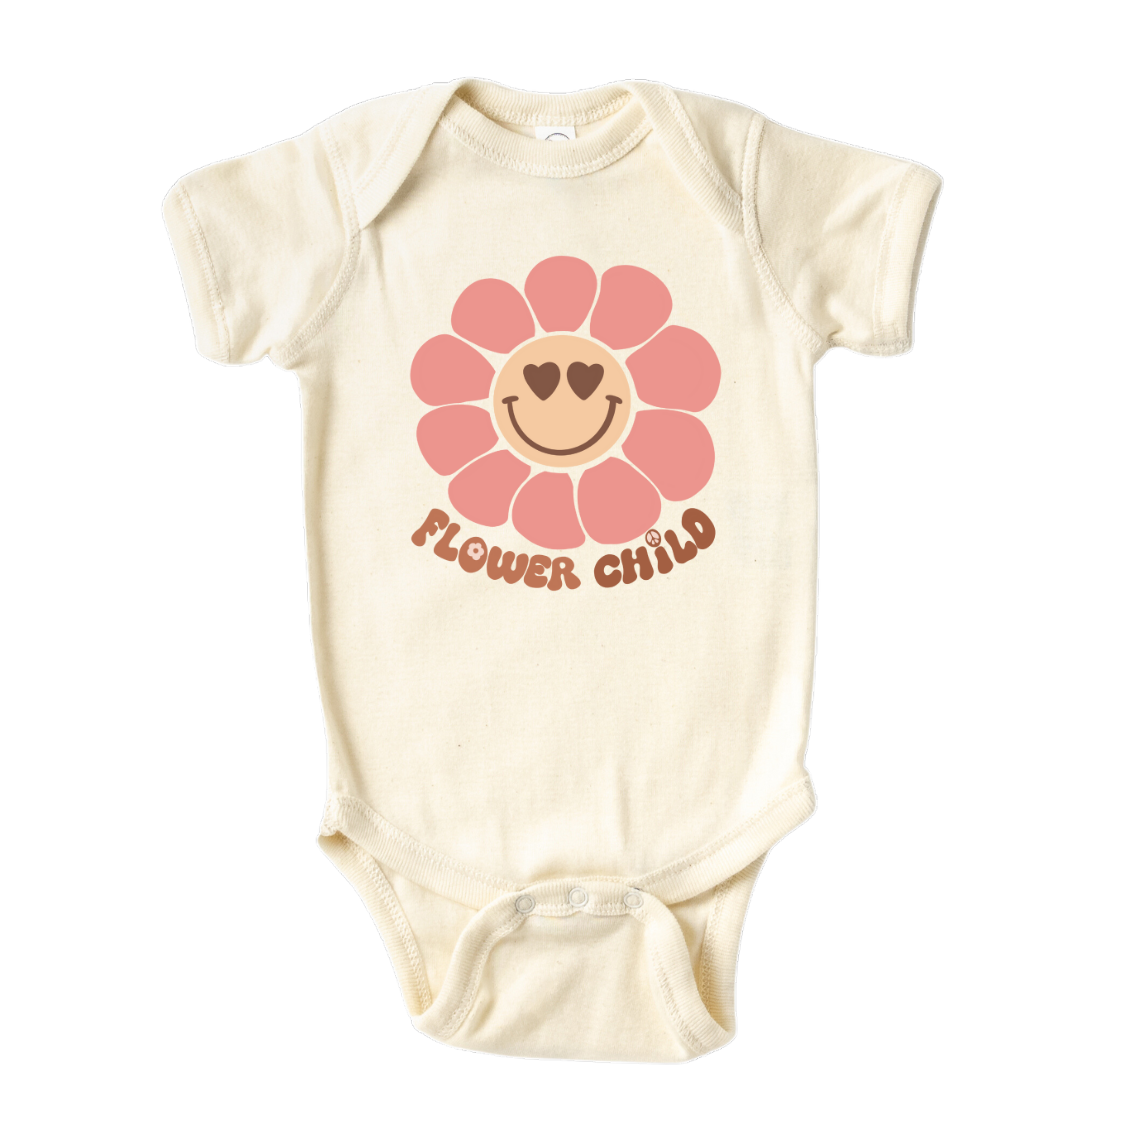 Natural Onesie with a cute flower graphic and text 'Flower Child' - Express your child's free-spirited style with this adorable flower-themed tee, perfect for little fashionistas. 